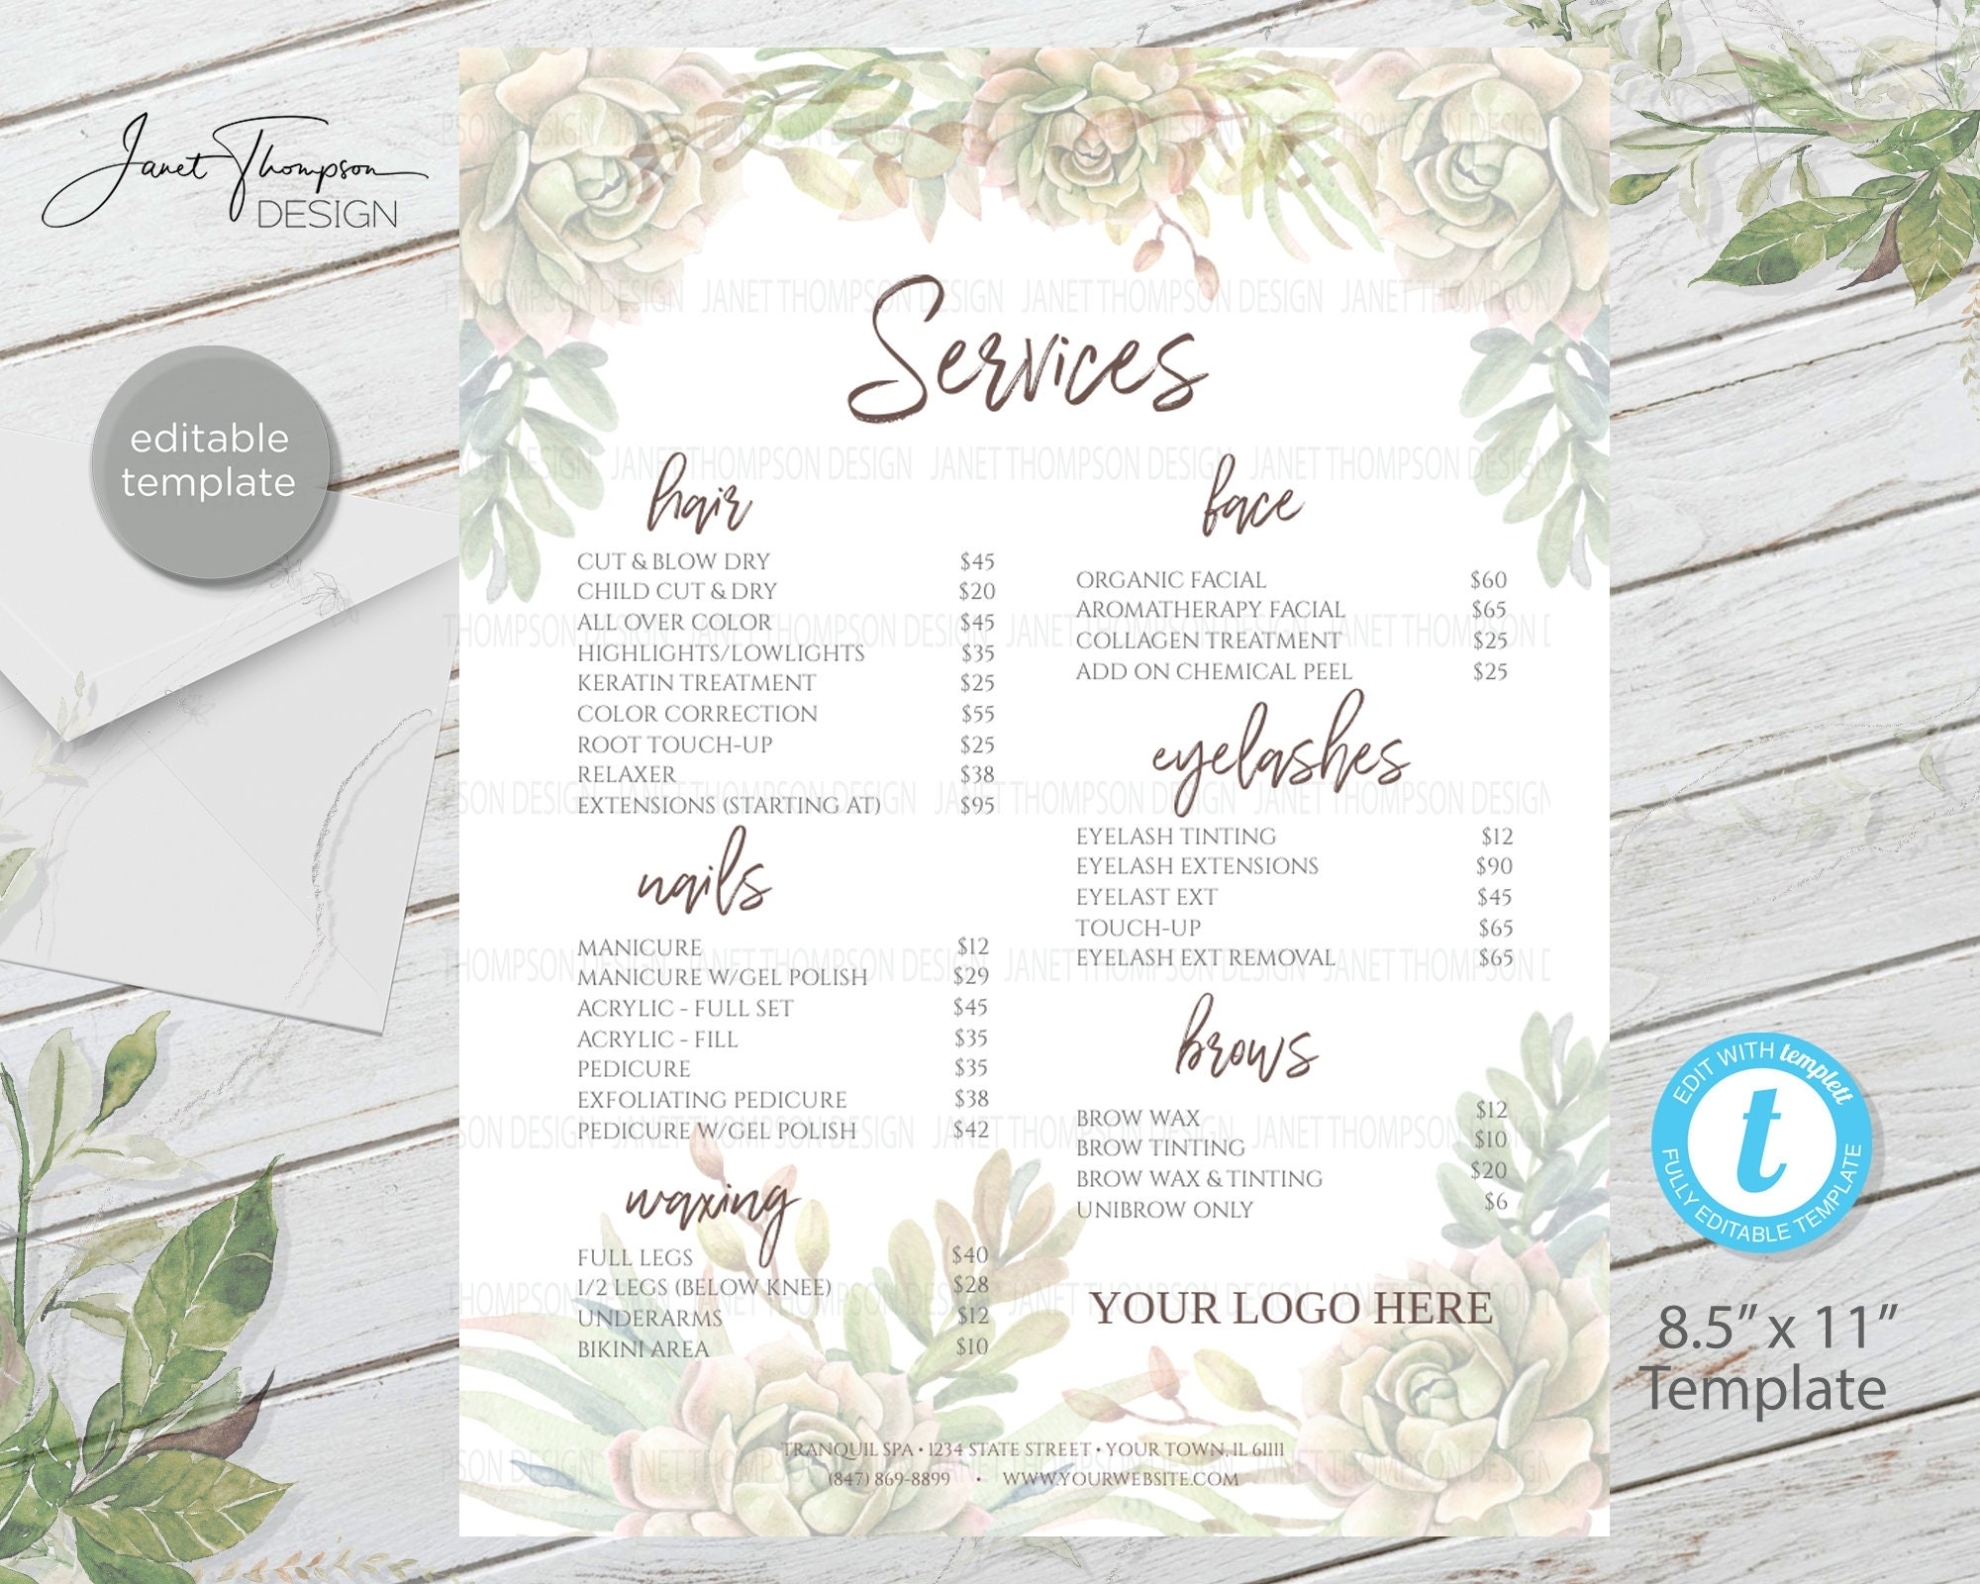 Paper & Party Supplies Nail Spa Menu Template Salon Menu Salon Services Throughout Salon Service Menu Template